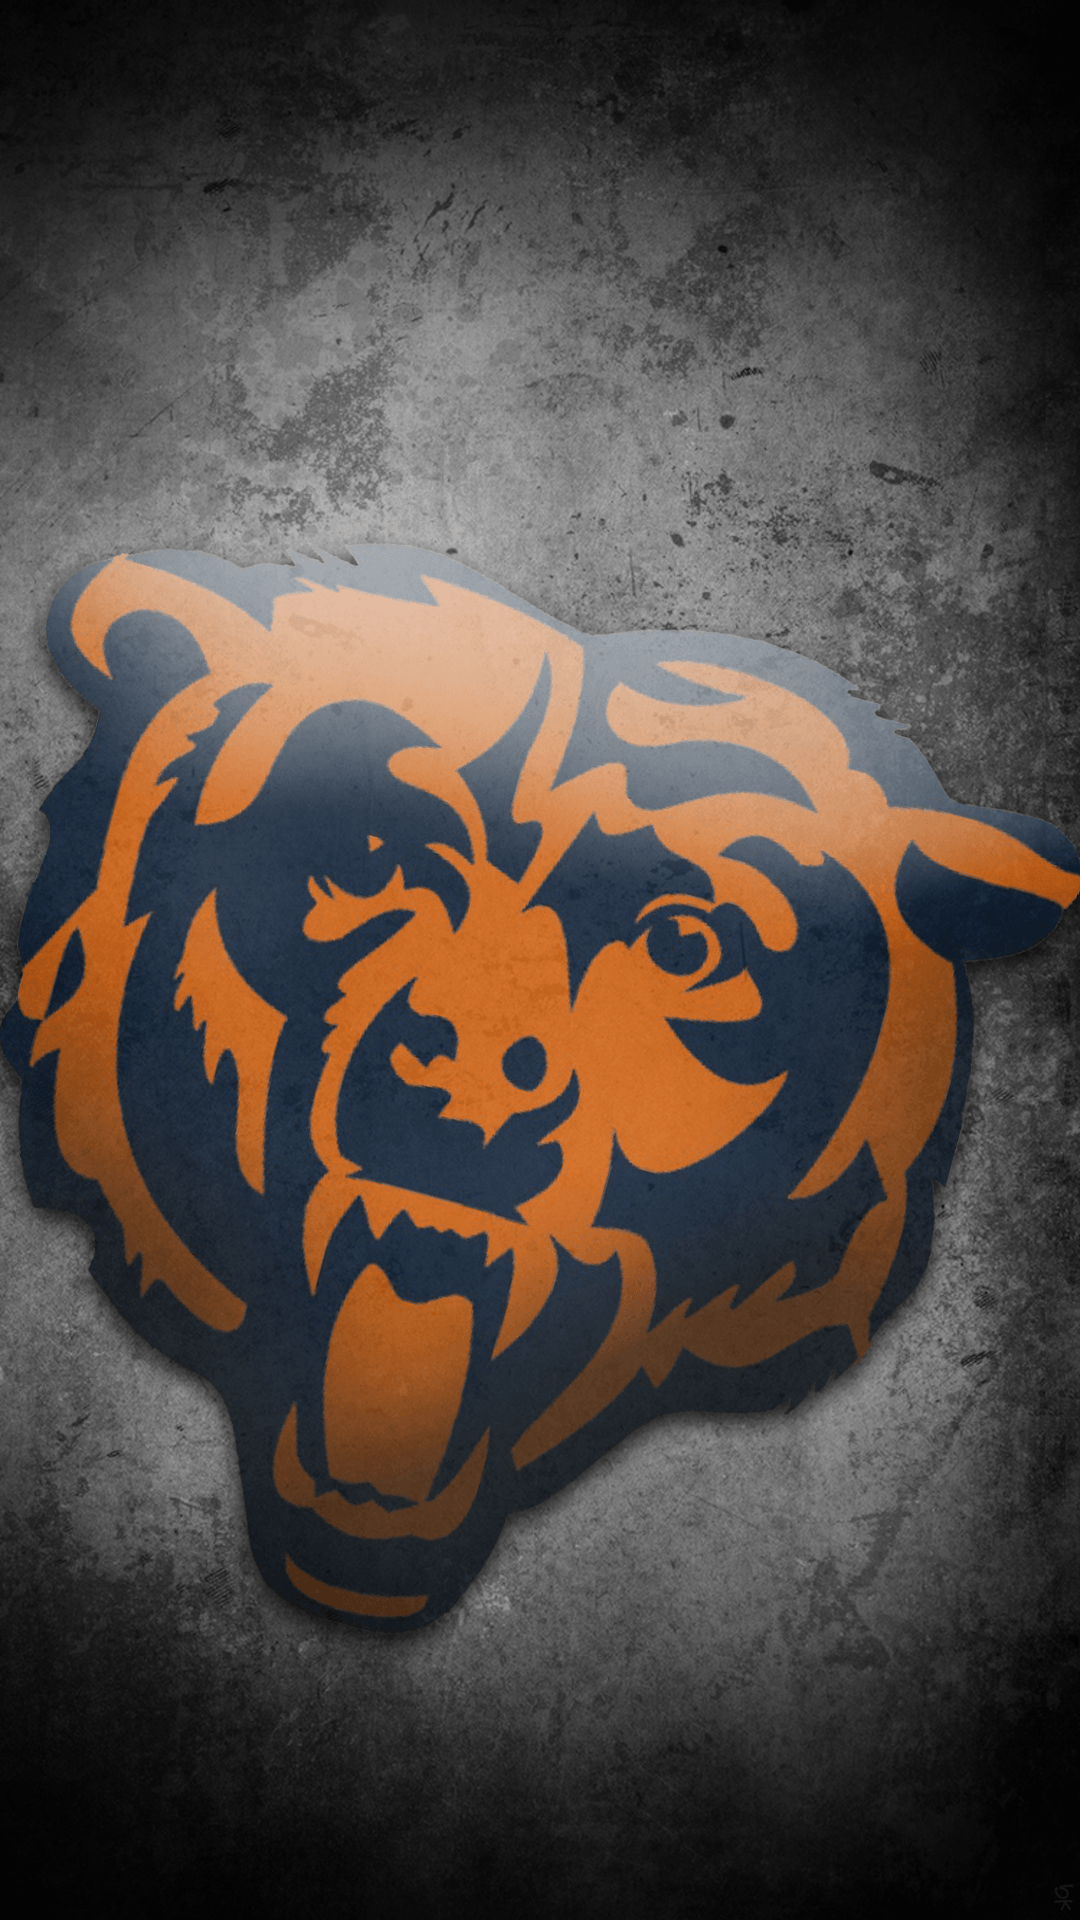 Chicago Bears Wallpapers 2017 - Wallpaper Cave